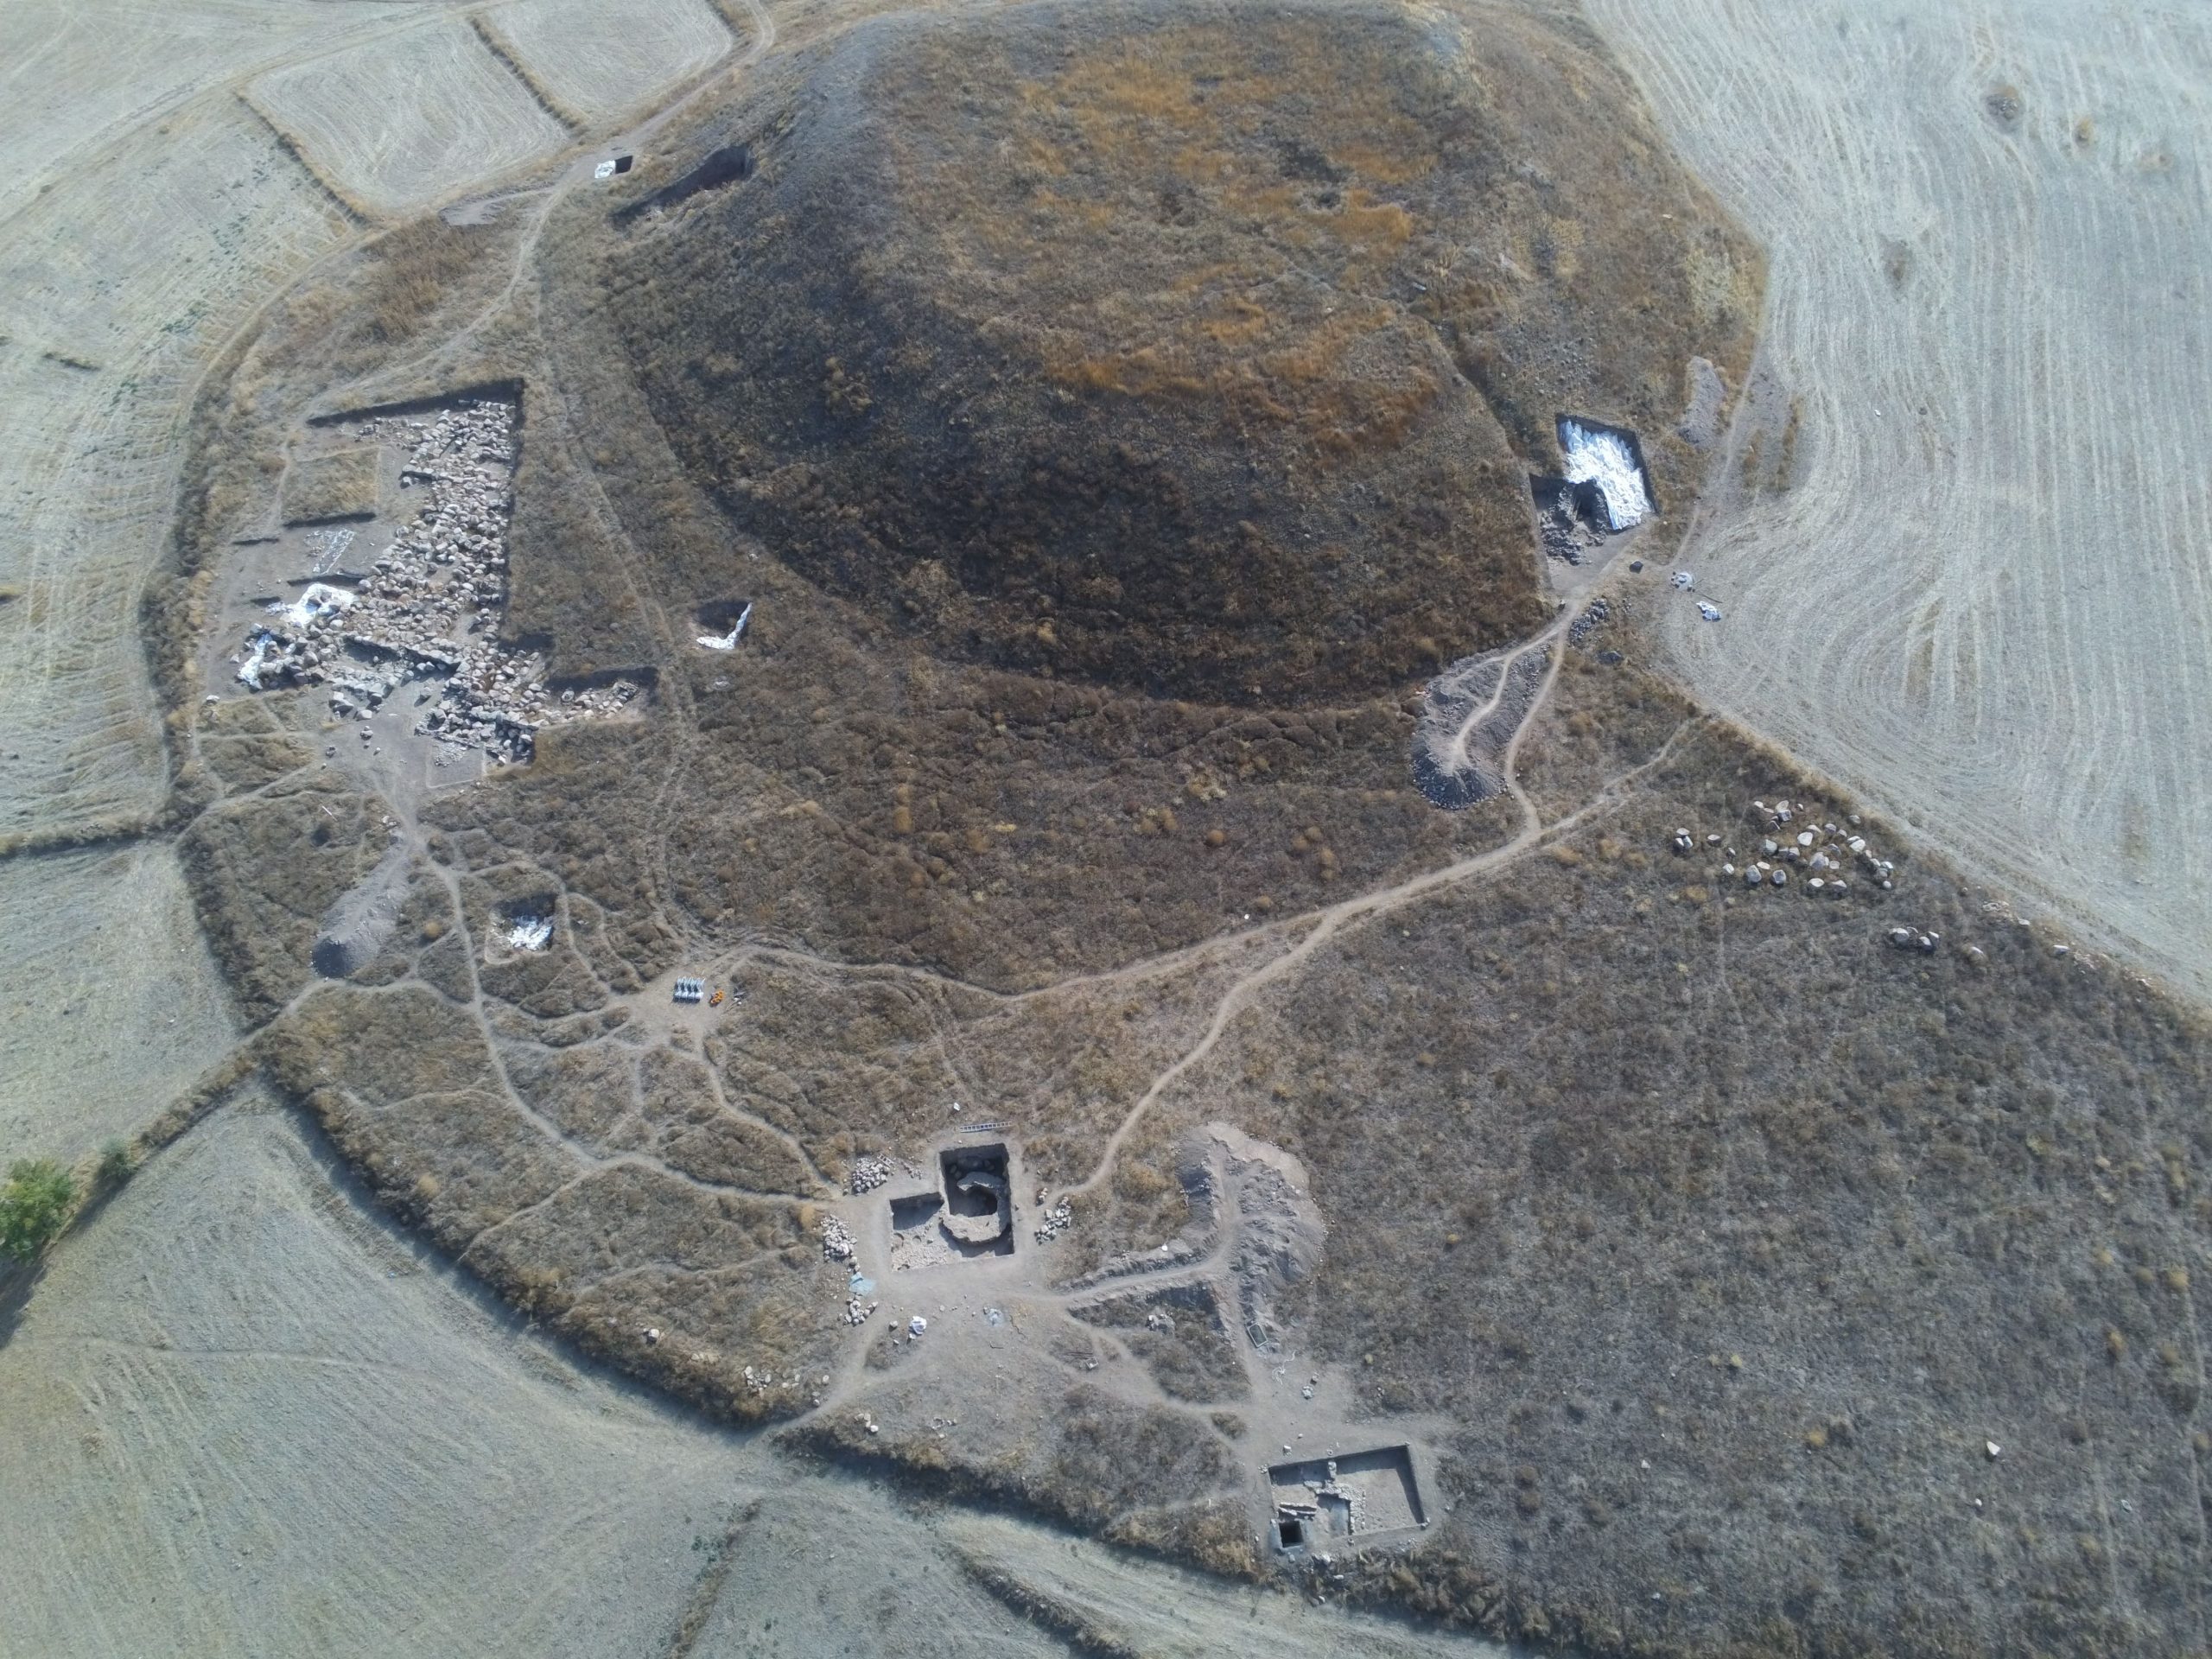 An aerial view of the strange circular structure that could belong to the long-lost ancient city of Zippalanda. Image Credit: archeologiaviva.it/ Emanuele Tacola.